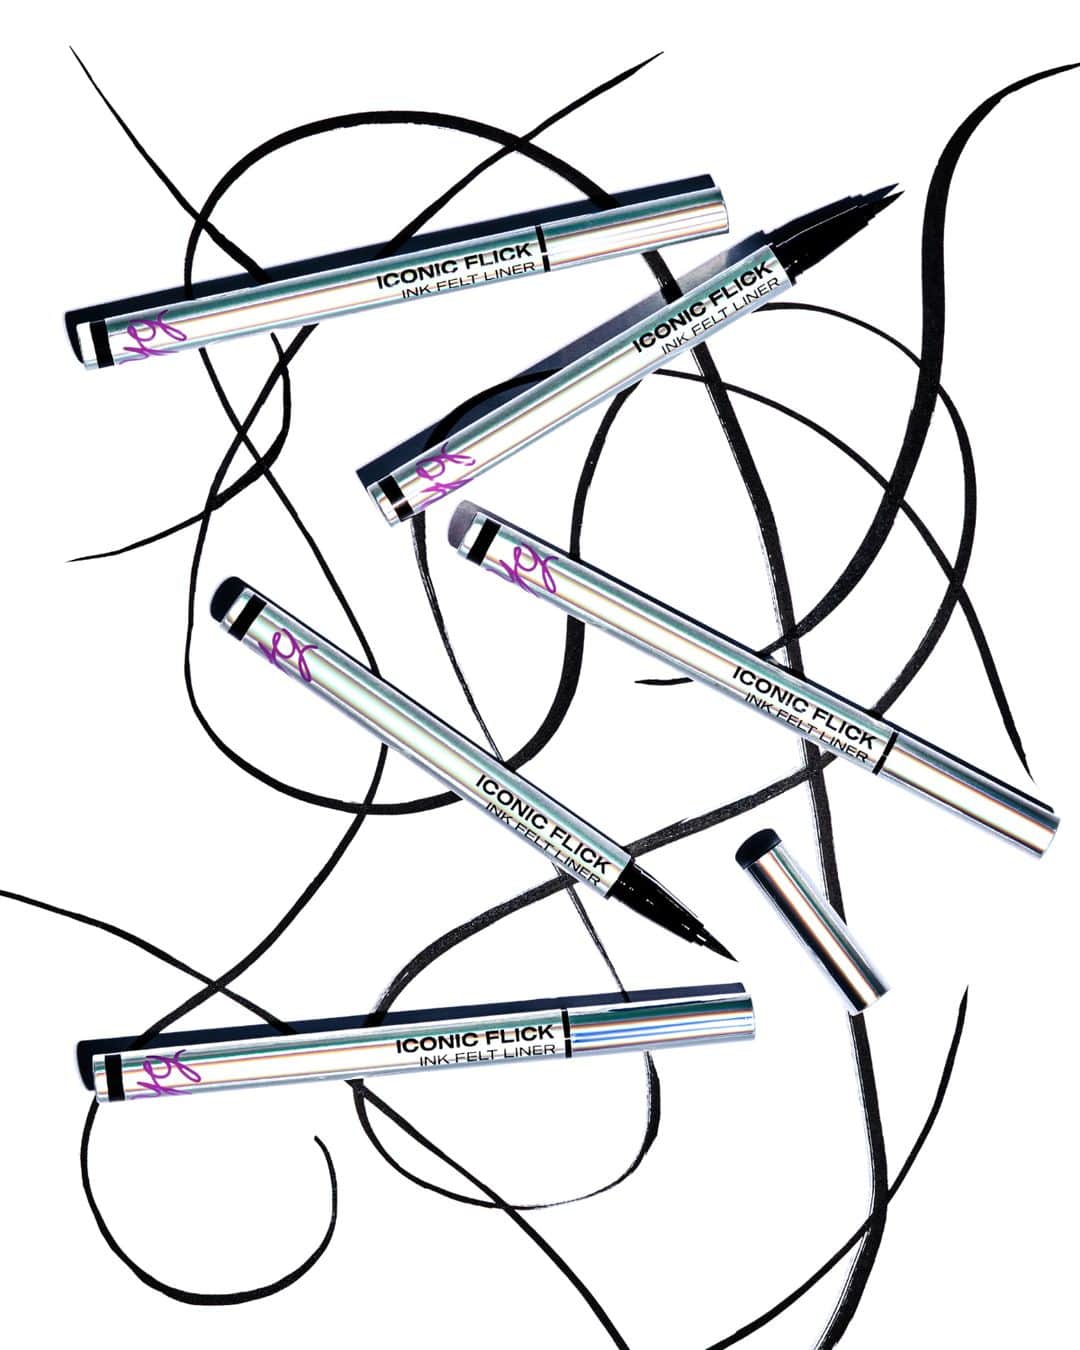 BH Cosmeticsのインスタグラム：「Meet our NEW Iconic Flick Ink Felt Liner 🖊️ The ultimate long-wearing, smudge-proof formula in the eye game 🏆 Go from fine lines to epic flicks in seconds with this ultra black, super-sharp, highly saturated liquid liner 👀 Here's why it'll be your new go-to 👇⁣ ​⁣ 💧 Waterproof, long-wearing, smudge-proof formula​⁣ 🖤 Ultra black, highly saturated liquid liner ​⁣ ⚡️ Super-sharp, flexible felt tip glides on smooth for a fluid and controlled application​⁣ ​🌱 Vegan. Cruelty-Free. Clean Ingredients.⁣ ⁣ #bhcosmetics」